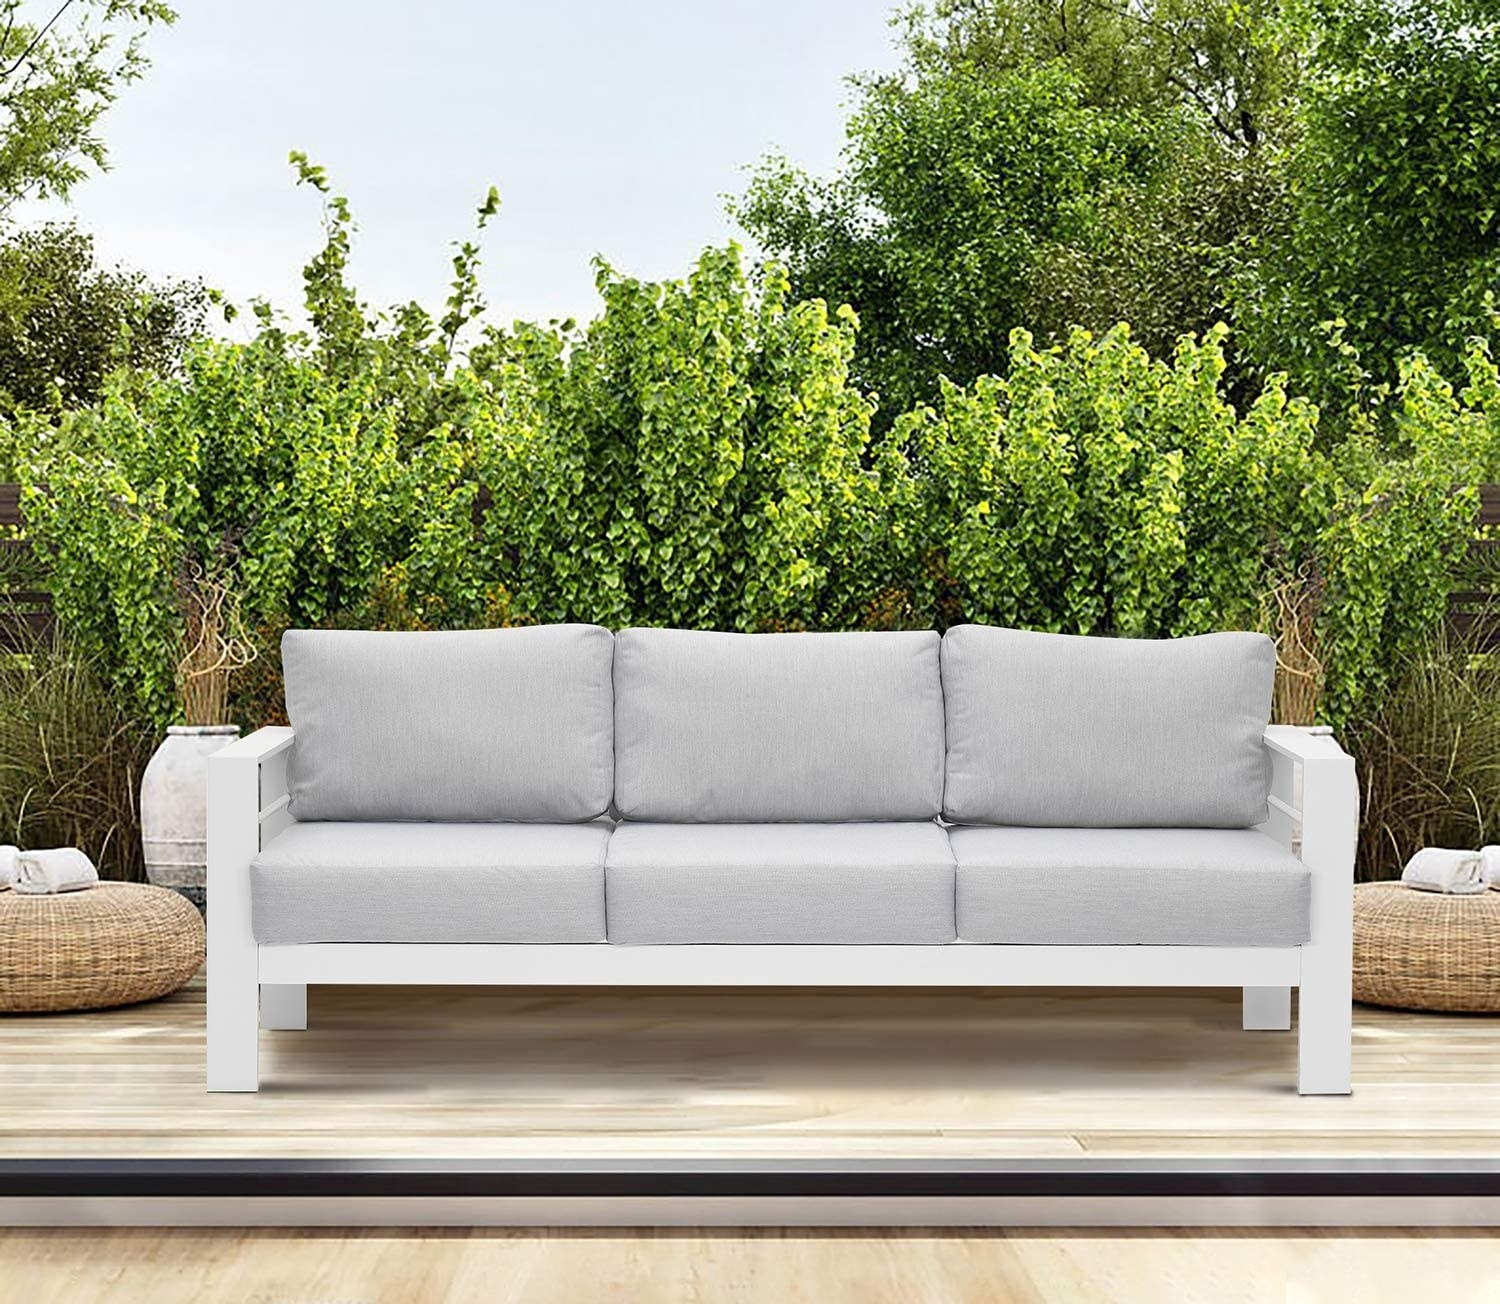 The gray and white metal sofa is shown